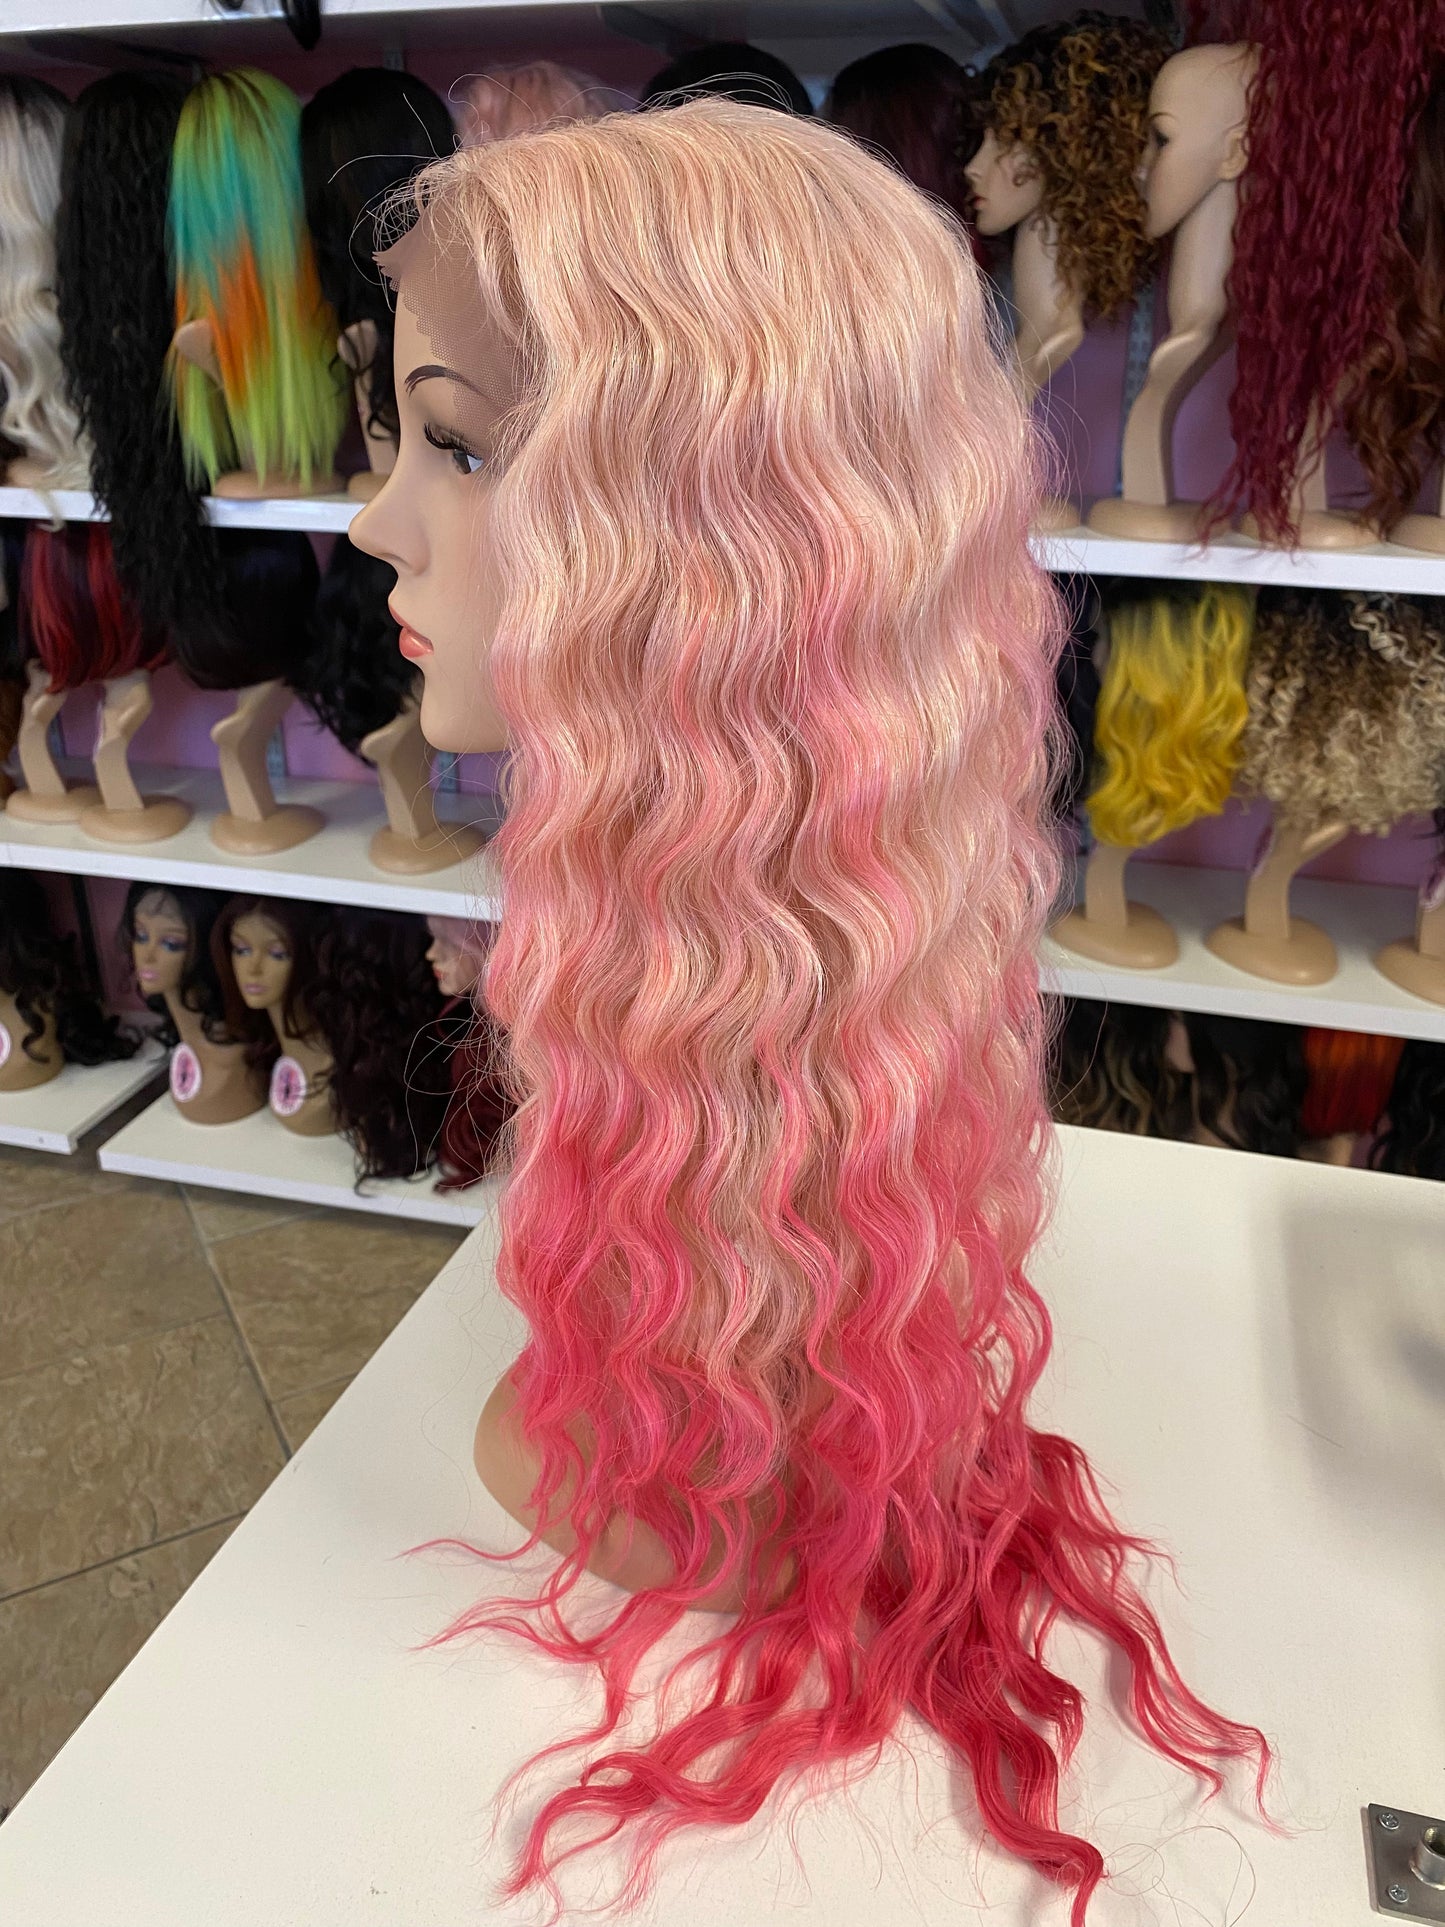 Marina - Middle Part Lace Front Wig - PINK FADE - DaizyKat Cosmetics Marina - Middle Part Lace Front Wig - PINK FADE DaizyKat Cosmetics Wigs